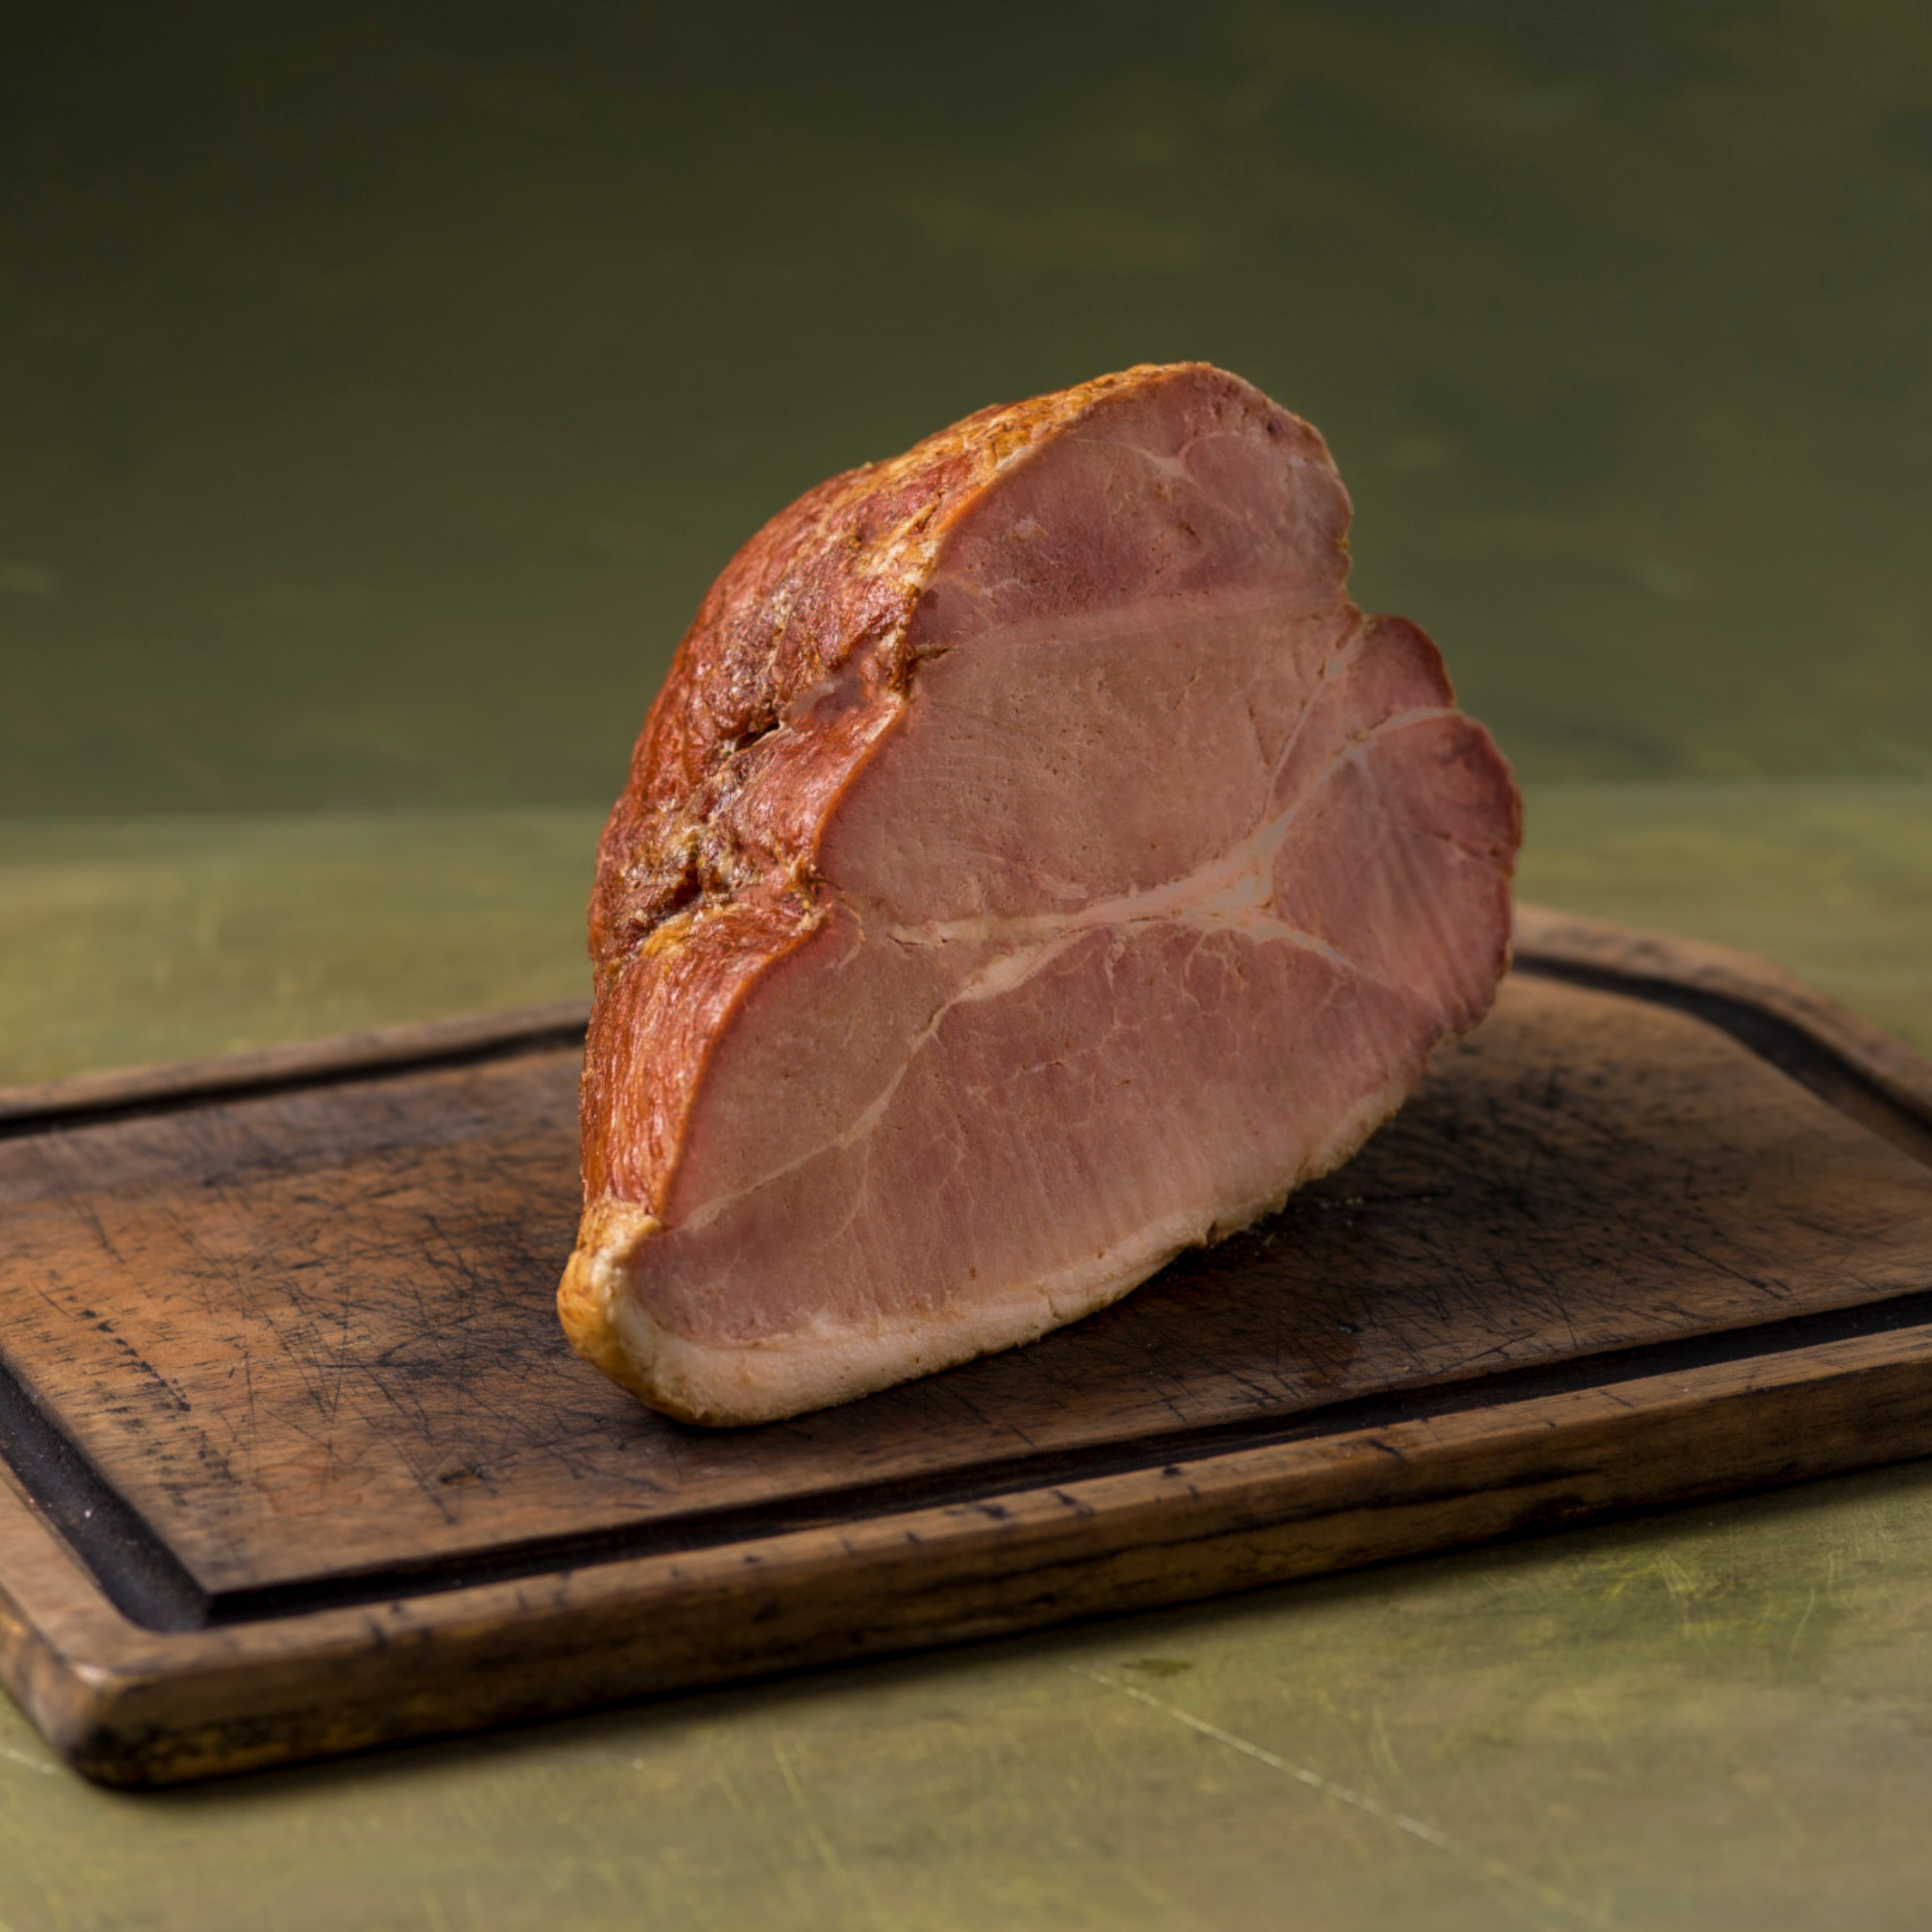 Grass Roots Farmers' Co-op Our hams are smoked low and slow over real hickory wood for 10 to 12 hours until tender. Succulent, with a slightly smoky aroma, this ham is versatile. It's a classic for brunches, lunches, and dinners at Easter, Christmas, Thanksgiving, and weddings—it's also perfect when you just need a serious ham fix. It is fully cooked and boneless for easy carving. Glaze it you want, but all you really need to do is heat and eat.